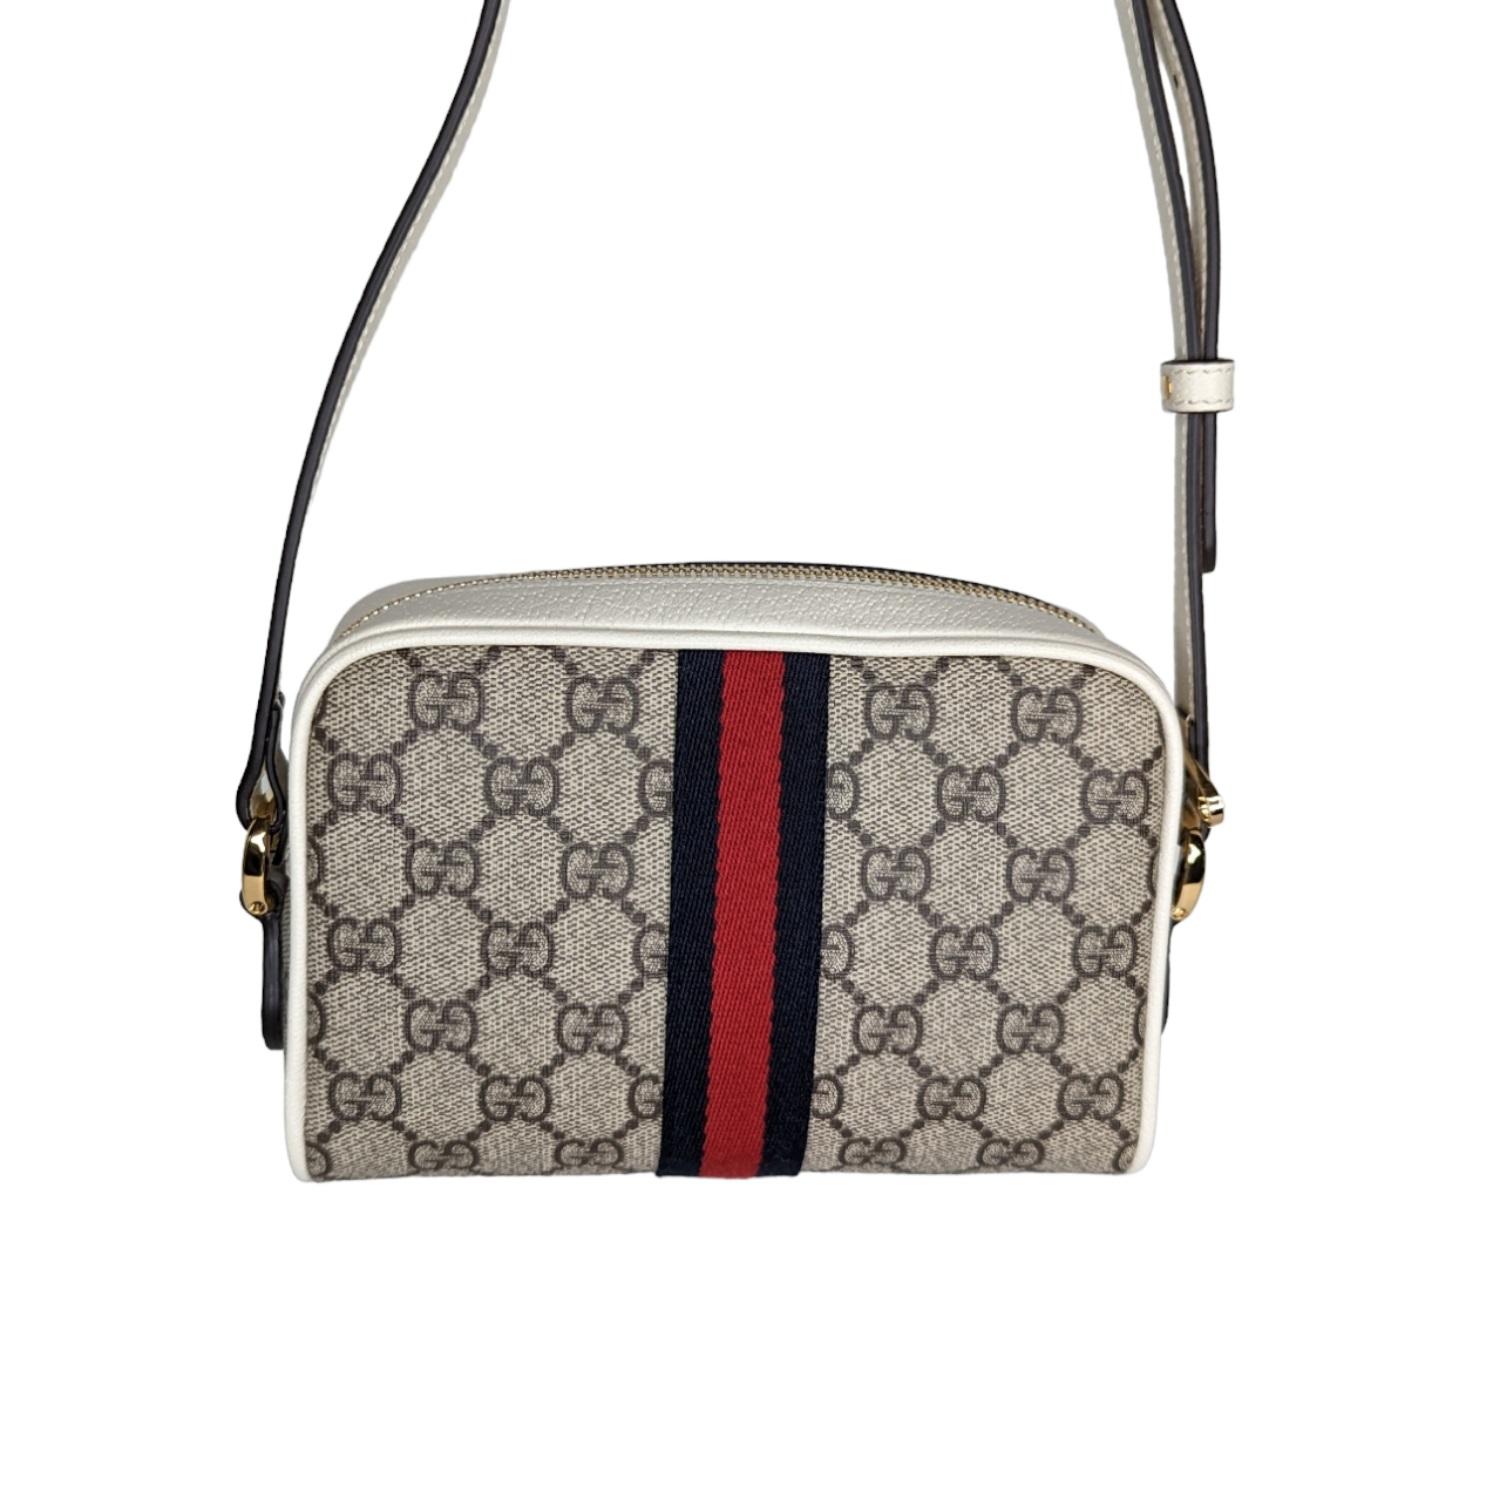 The world of Ophidia evolves with the introduction of a structured mini bag with a contrasting white leather trim. First used in the 1970s, the GG logo was an evolution of the original Gucci rhombi design from the 1930s, and from then it's been an